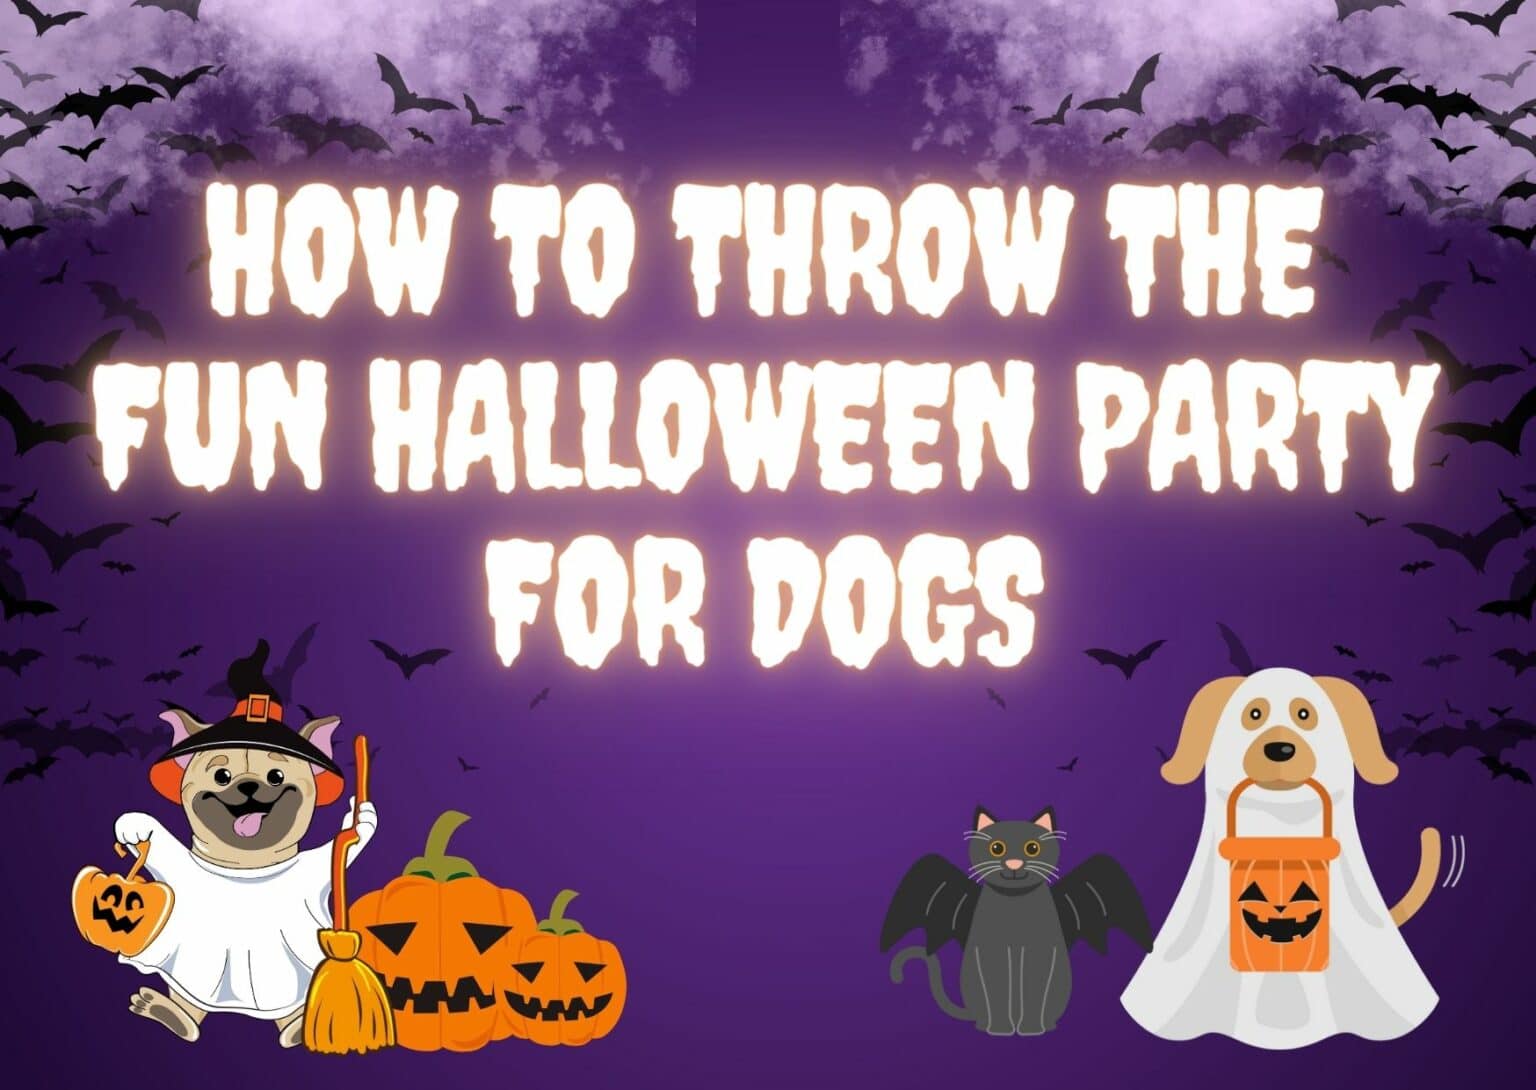 How to Throw the Fun Halloween Party for Dogs